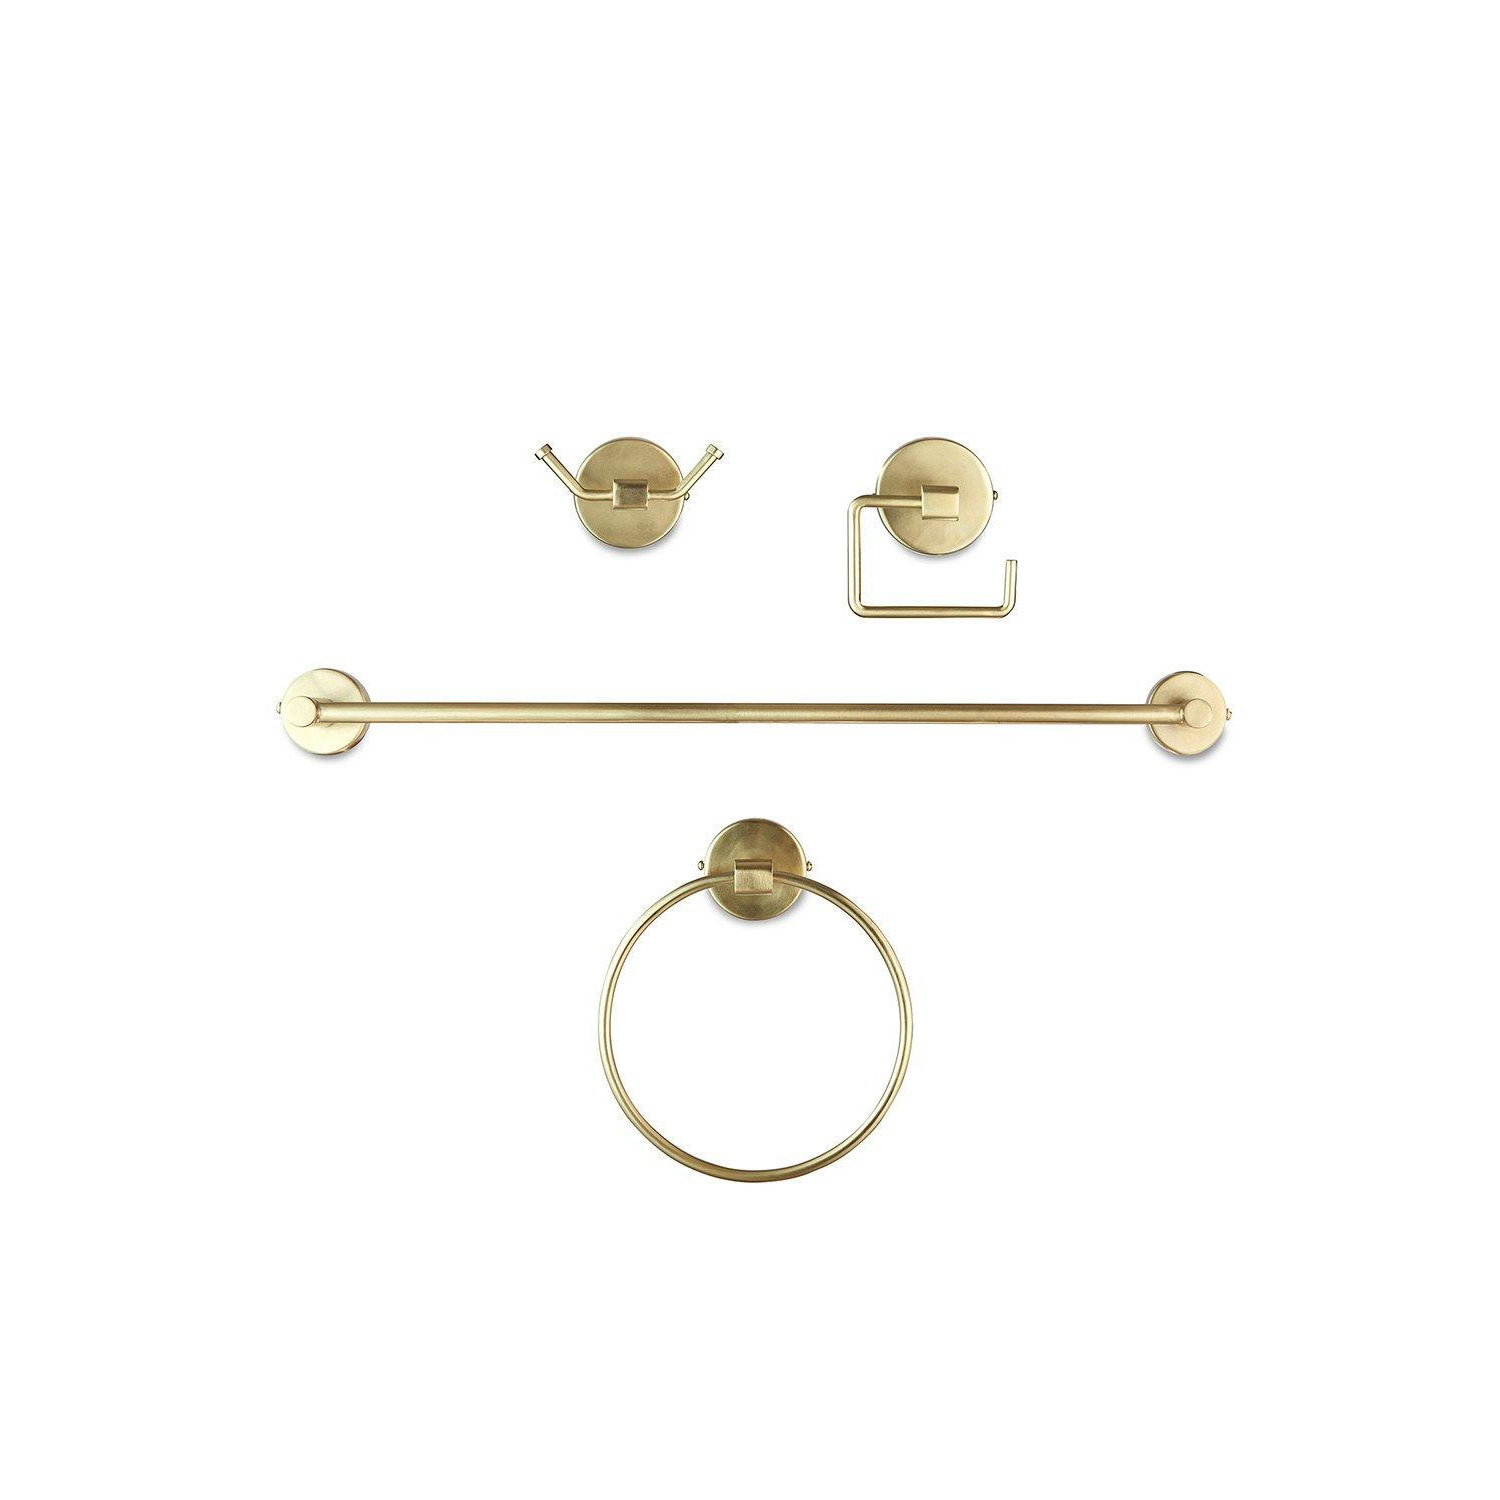 OurHouse 4pc Fittings Brass - image 1